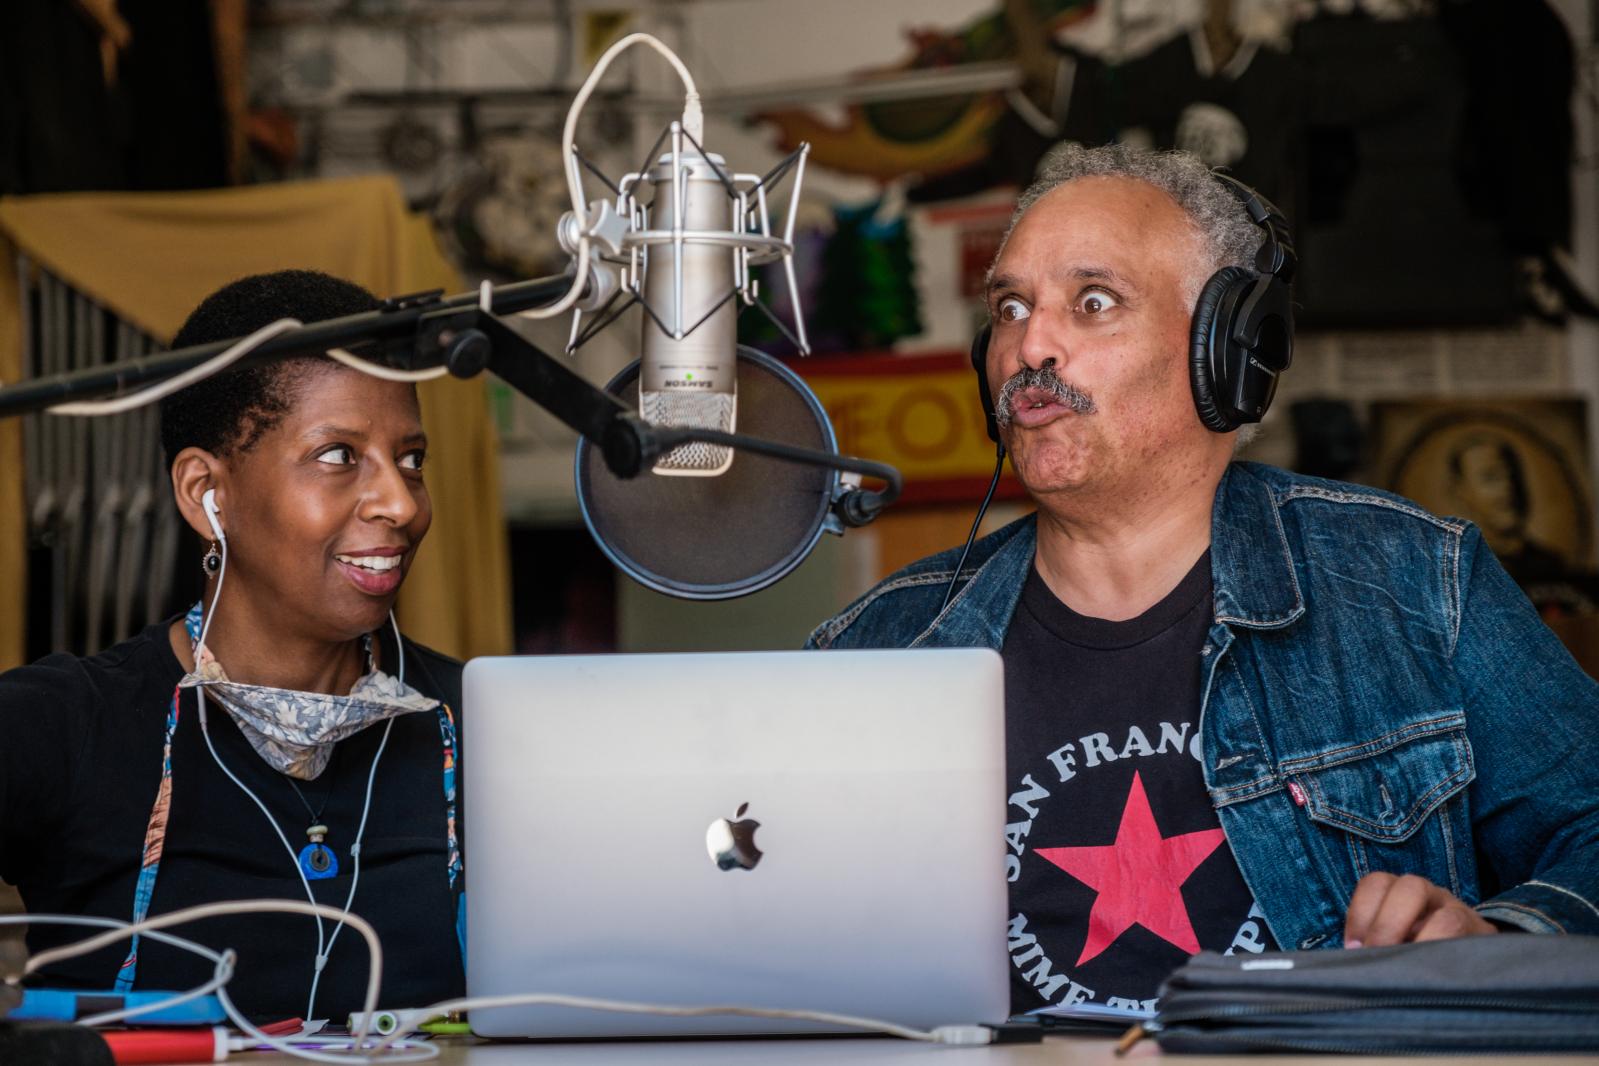 San Francisco MimeTroupe members Velina Brown and Michael Gene Sullivan rehearse the Troupe&rsquo;s radio serial called &ldquo;Tales of the Resistance&rdquo; at the Troupe&rsquo;s office in San Francisco on Monday, July 6, 2020.